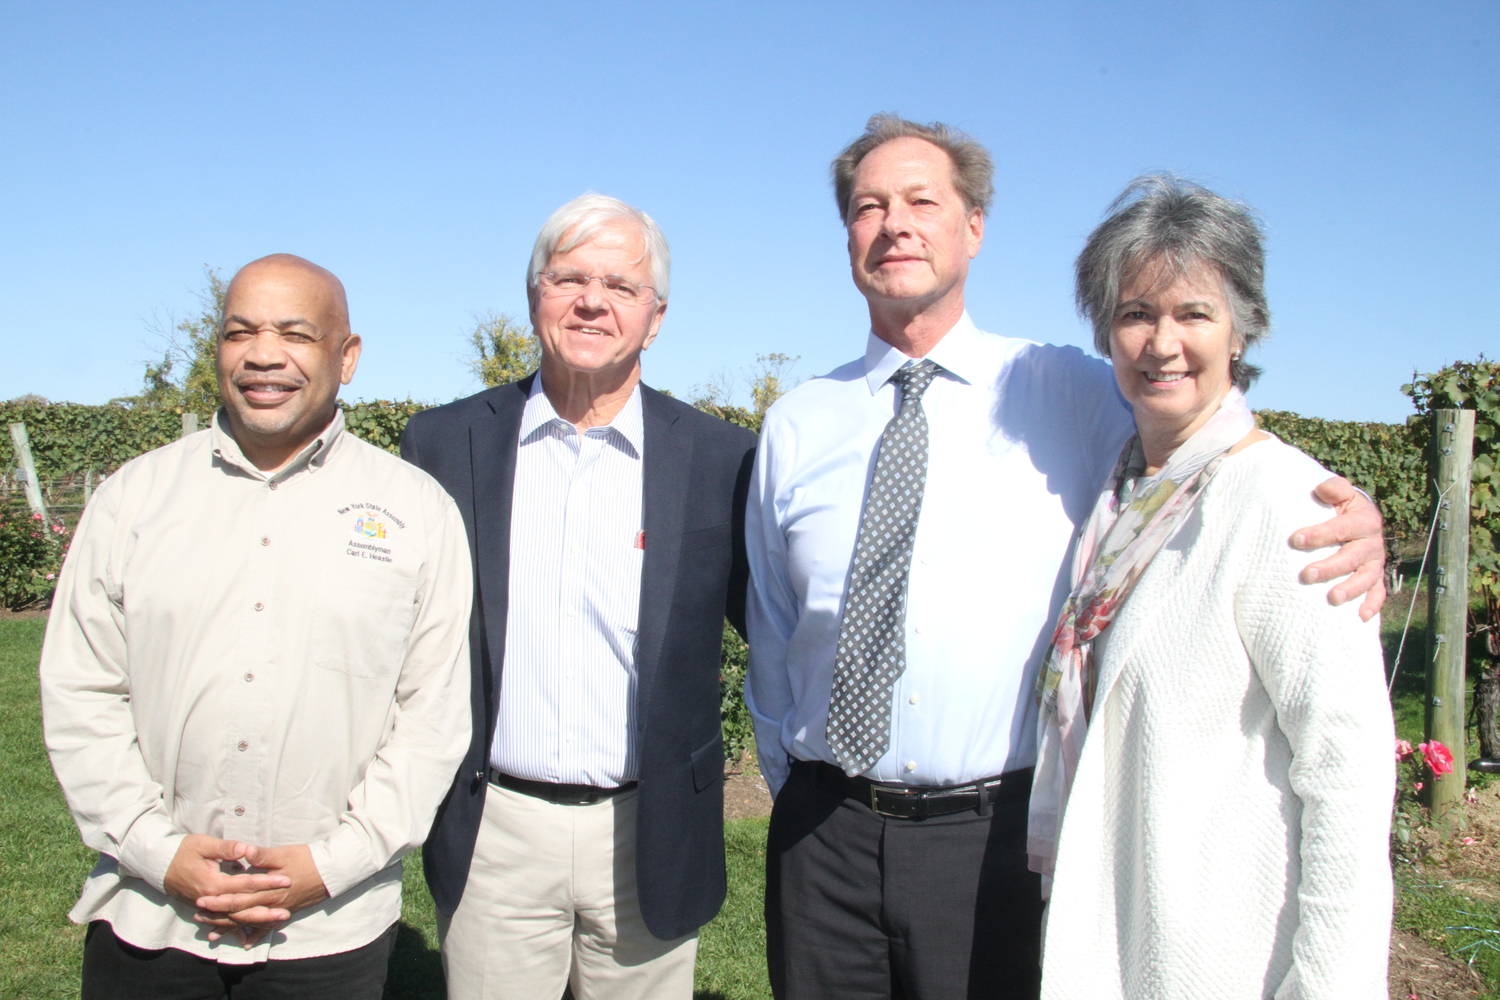 Heastie and Thiele announced that the Montauk Playhouse will get a $1.7 million grant for Phase II of the renovation project, which will create a new swimming pool and aquatic center in Phase I and a cultural and community center in Phase II.
MICHAEL WRIGHT